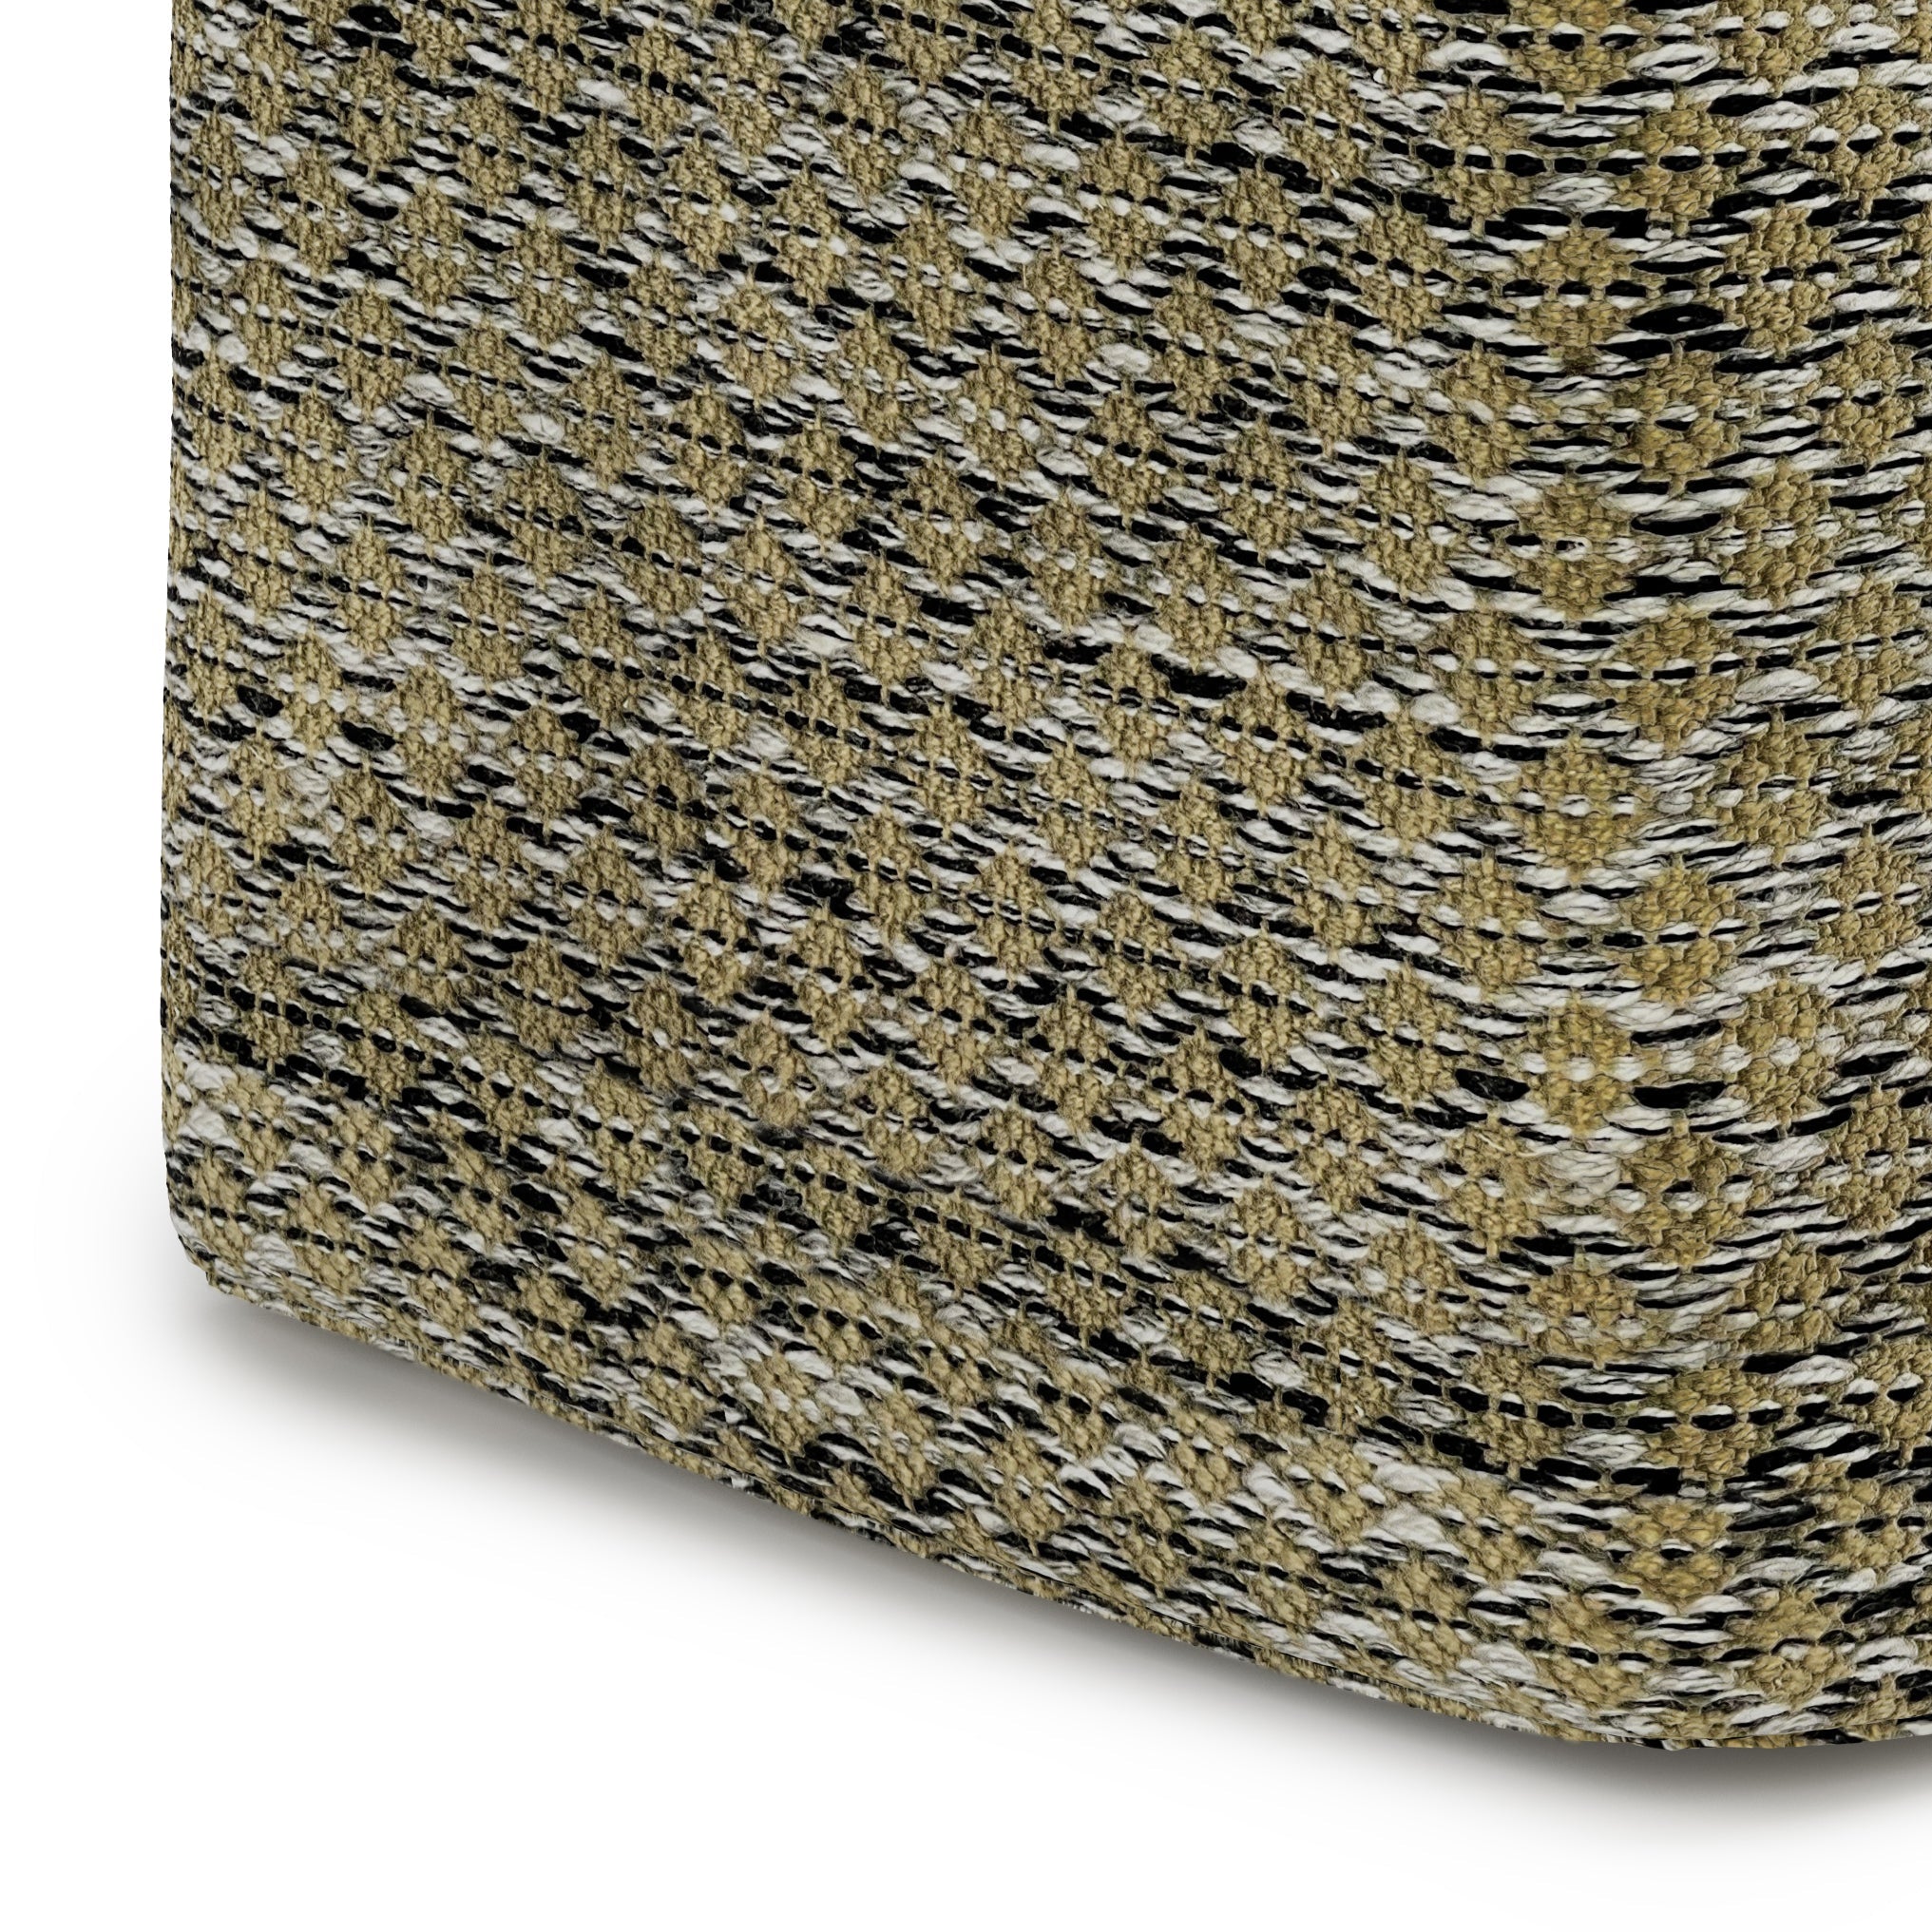 Outdoor Multi-functional Square Woven Pouf with Water and UV Ray Resistant - Pouf